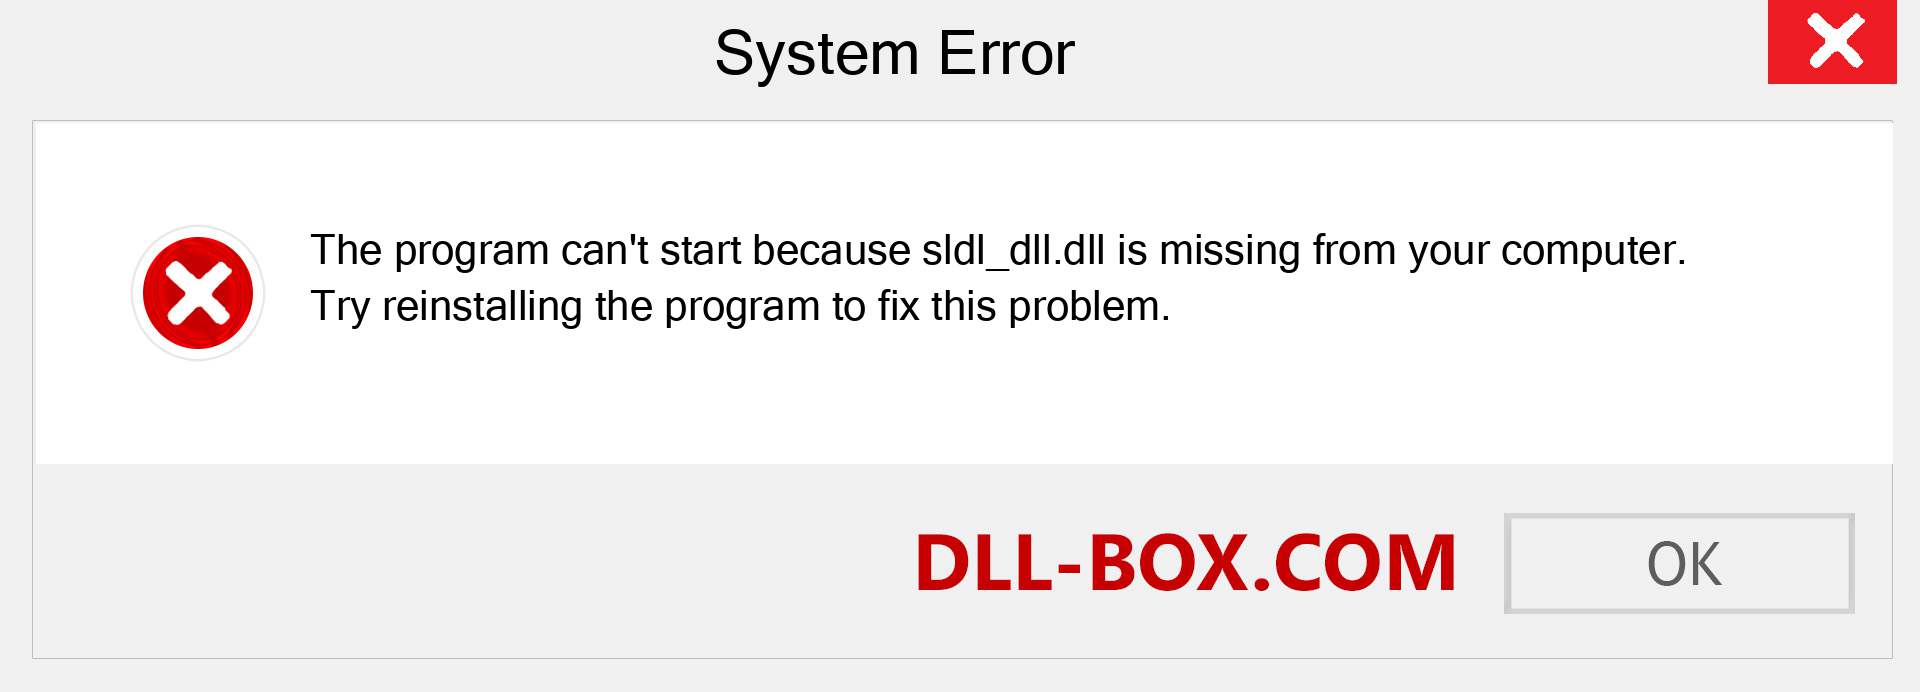  sldl_dll.dll file is missing?. Download for Windows 7, 8, 10 - Fix  sldl_dll dll Missing Error on Windows, photos, images